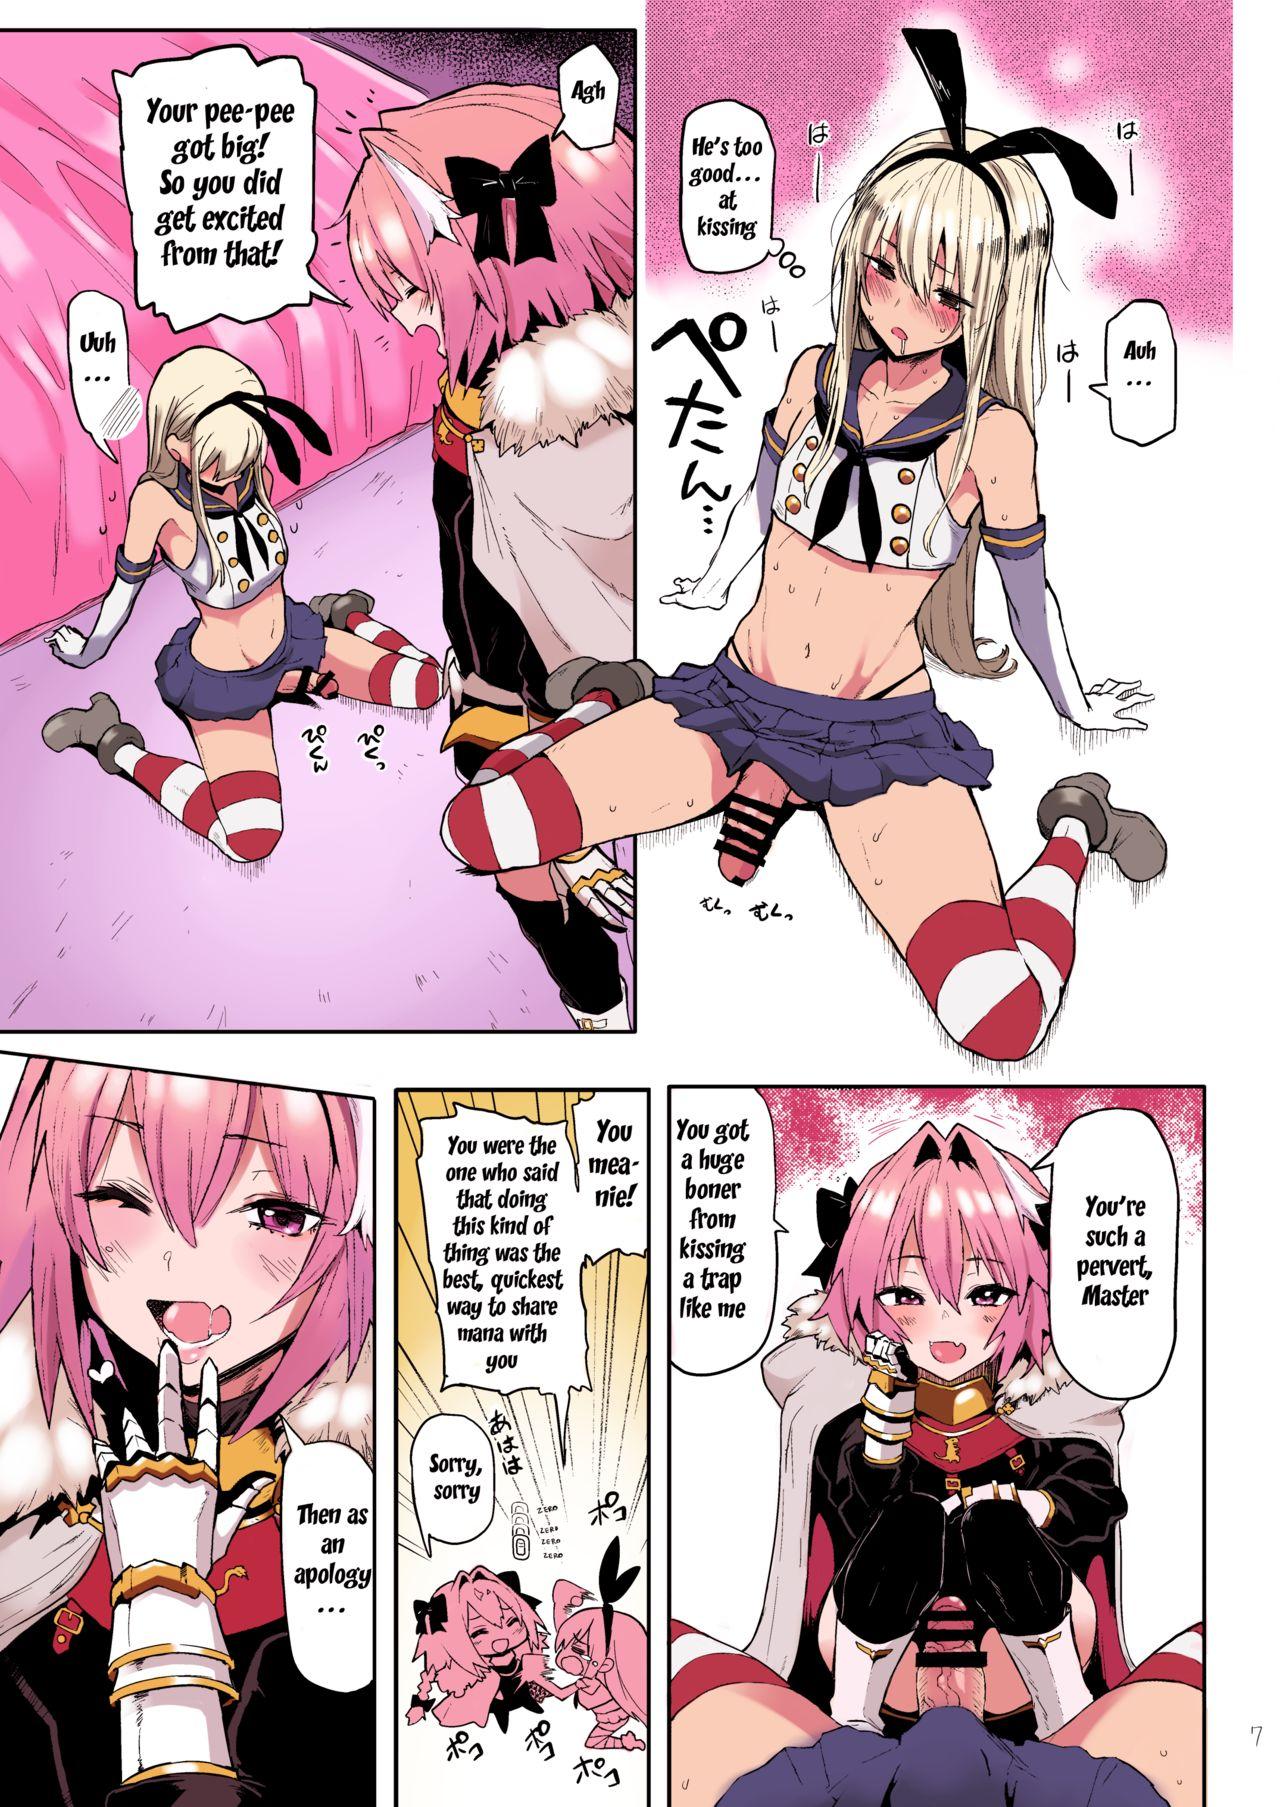 Orgame Astolfo x Astolfo - Fate grand order Anal Gape - Page 7